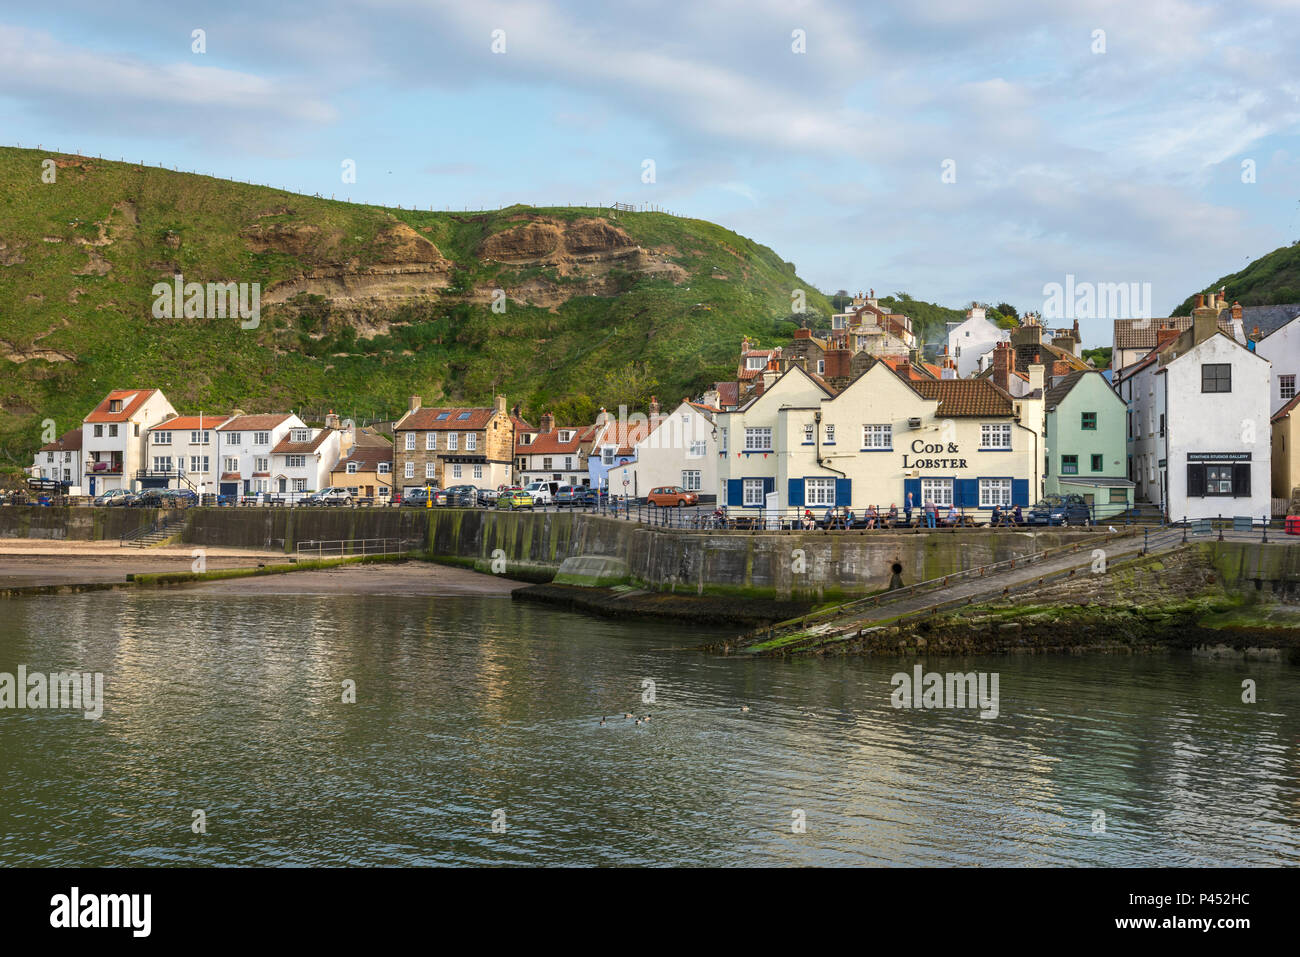 Beautiful May evening at Staithes, a picturesque, historic fishing village on the coast of North East England. Stock Photo